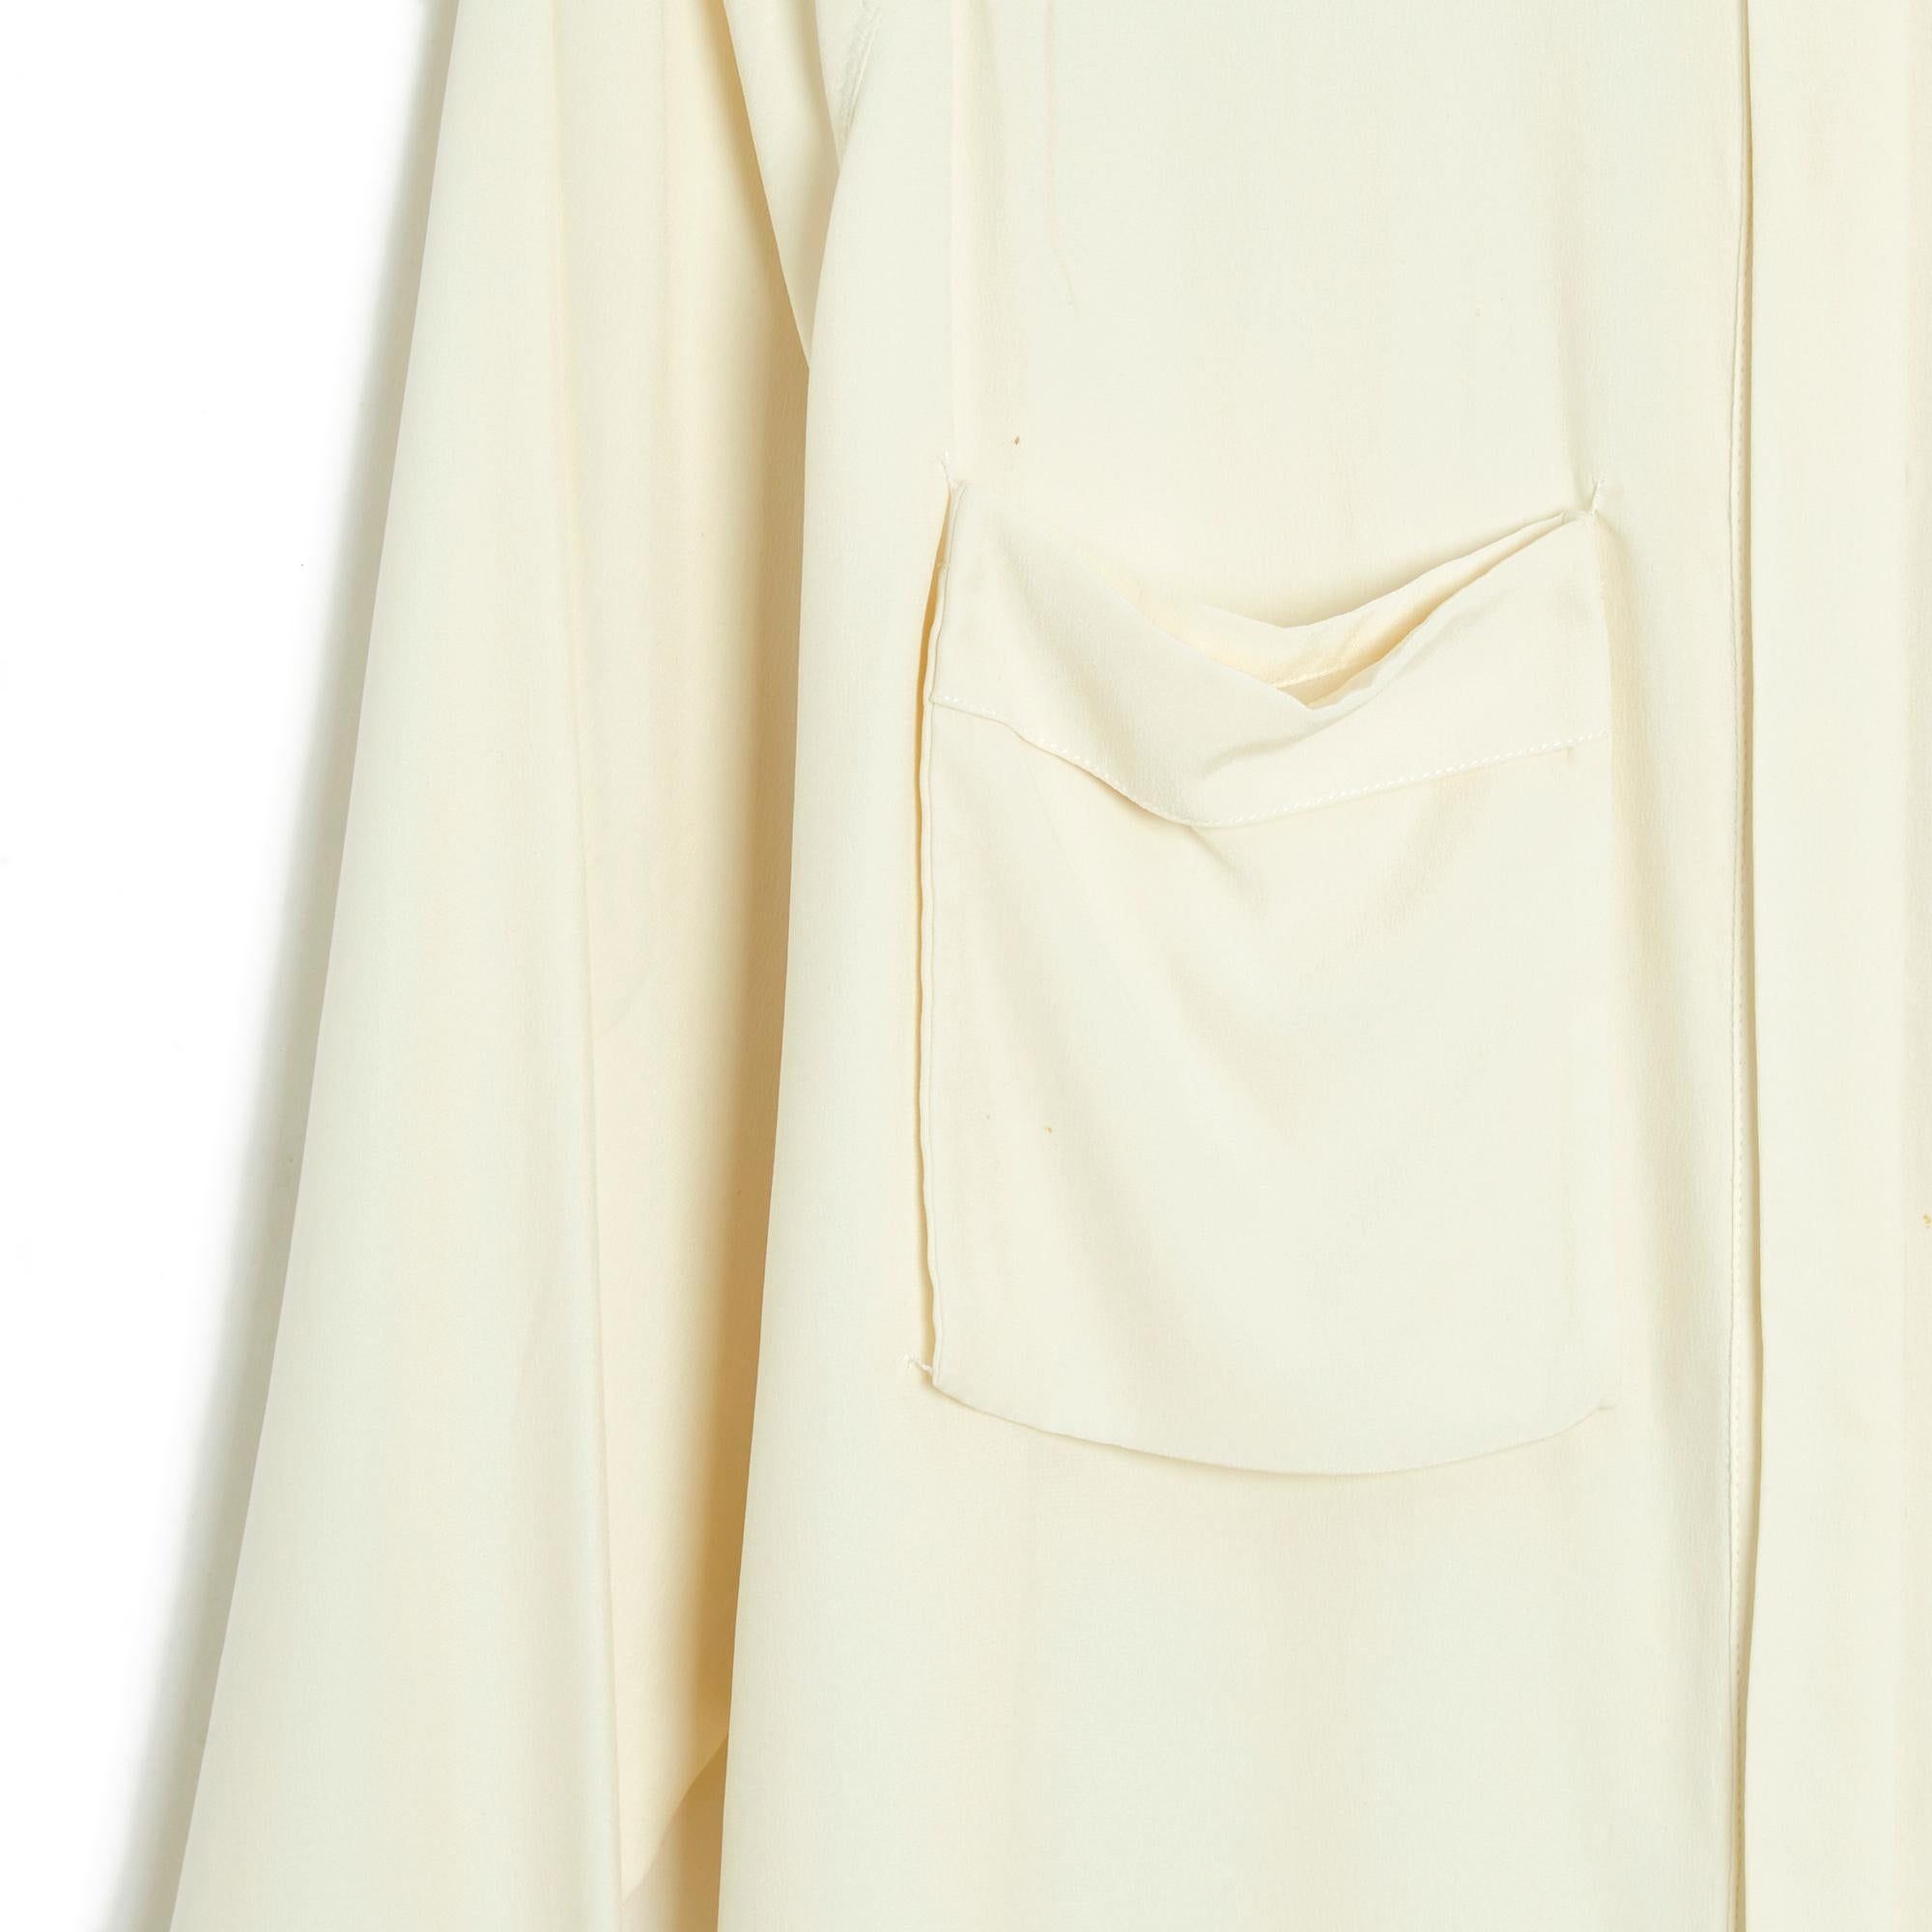 Céline top by Phoebe Philo blouse in ecru silk crepe, classic collar, hidden button placket, 2 chest pockets attached to the 4 corners (only), shirt bottom, back pleat, long buttoned raglan sleeves. Size 36FR (perfect in 38FR): middle 38 cm, chest